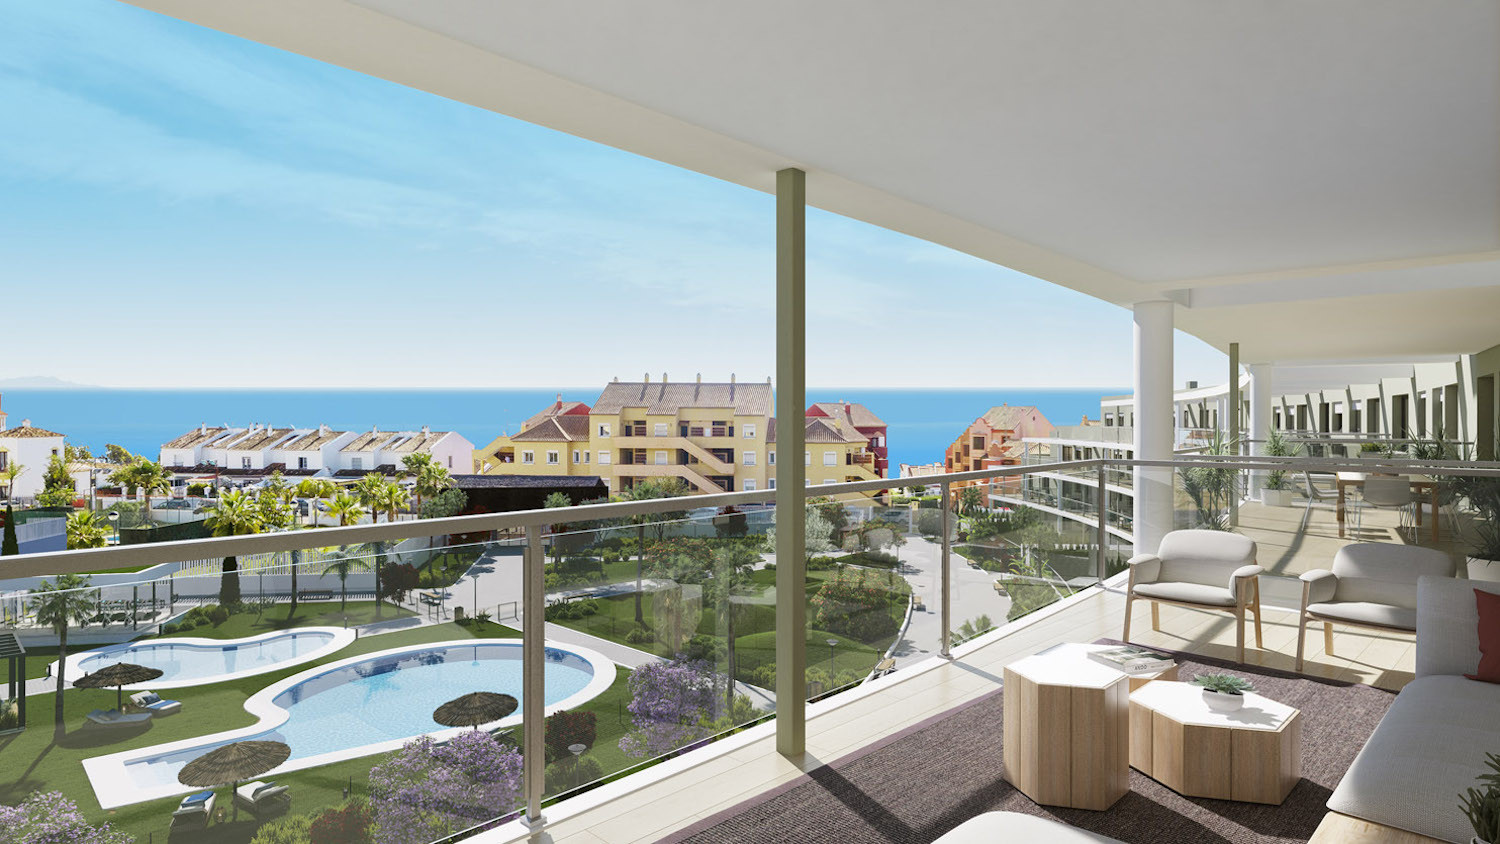 Brand new 2 bedroom flat with views to the coast of Manilva. | Image 6